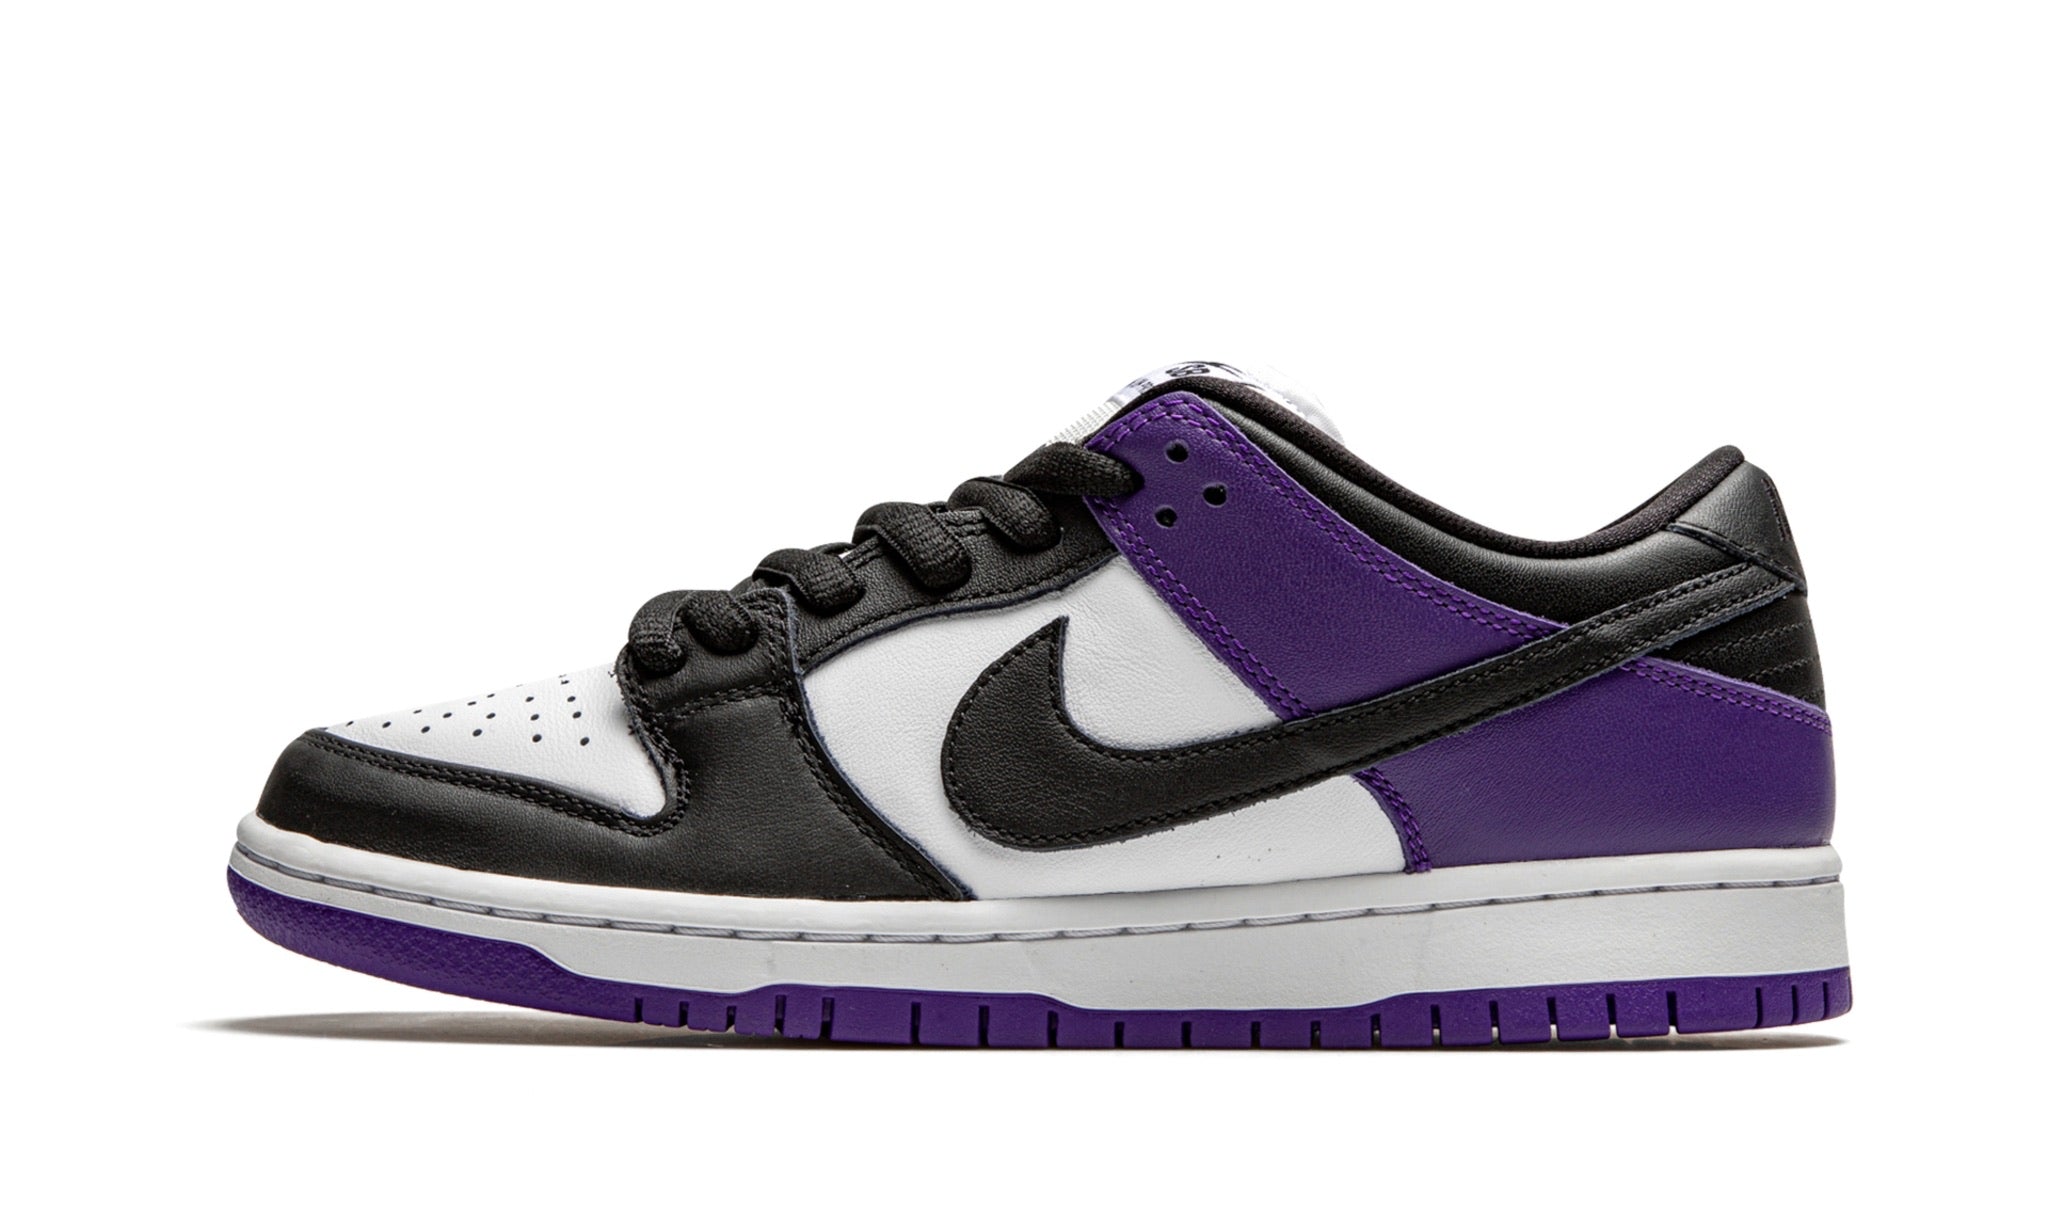 NIKE SB DUNK LOW COURT PURPLE – ONE OF A KIND